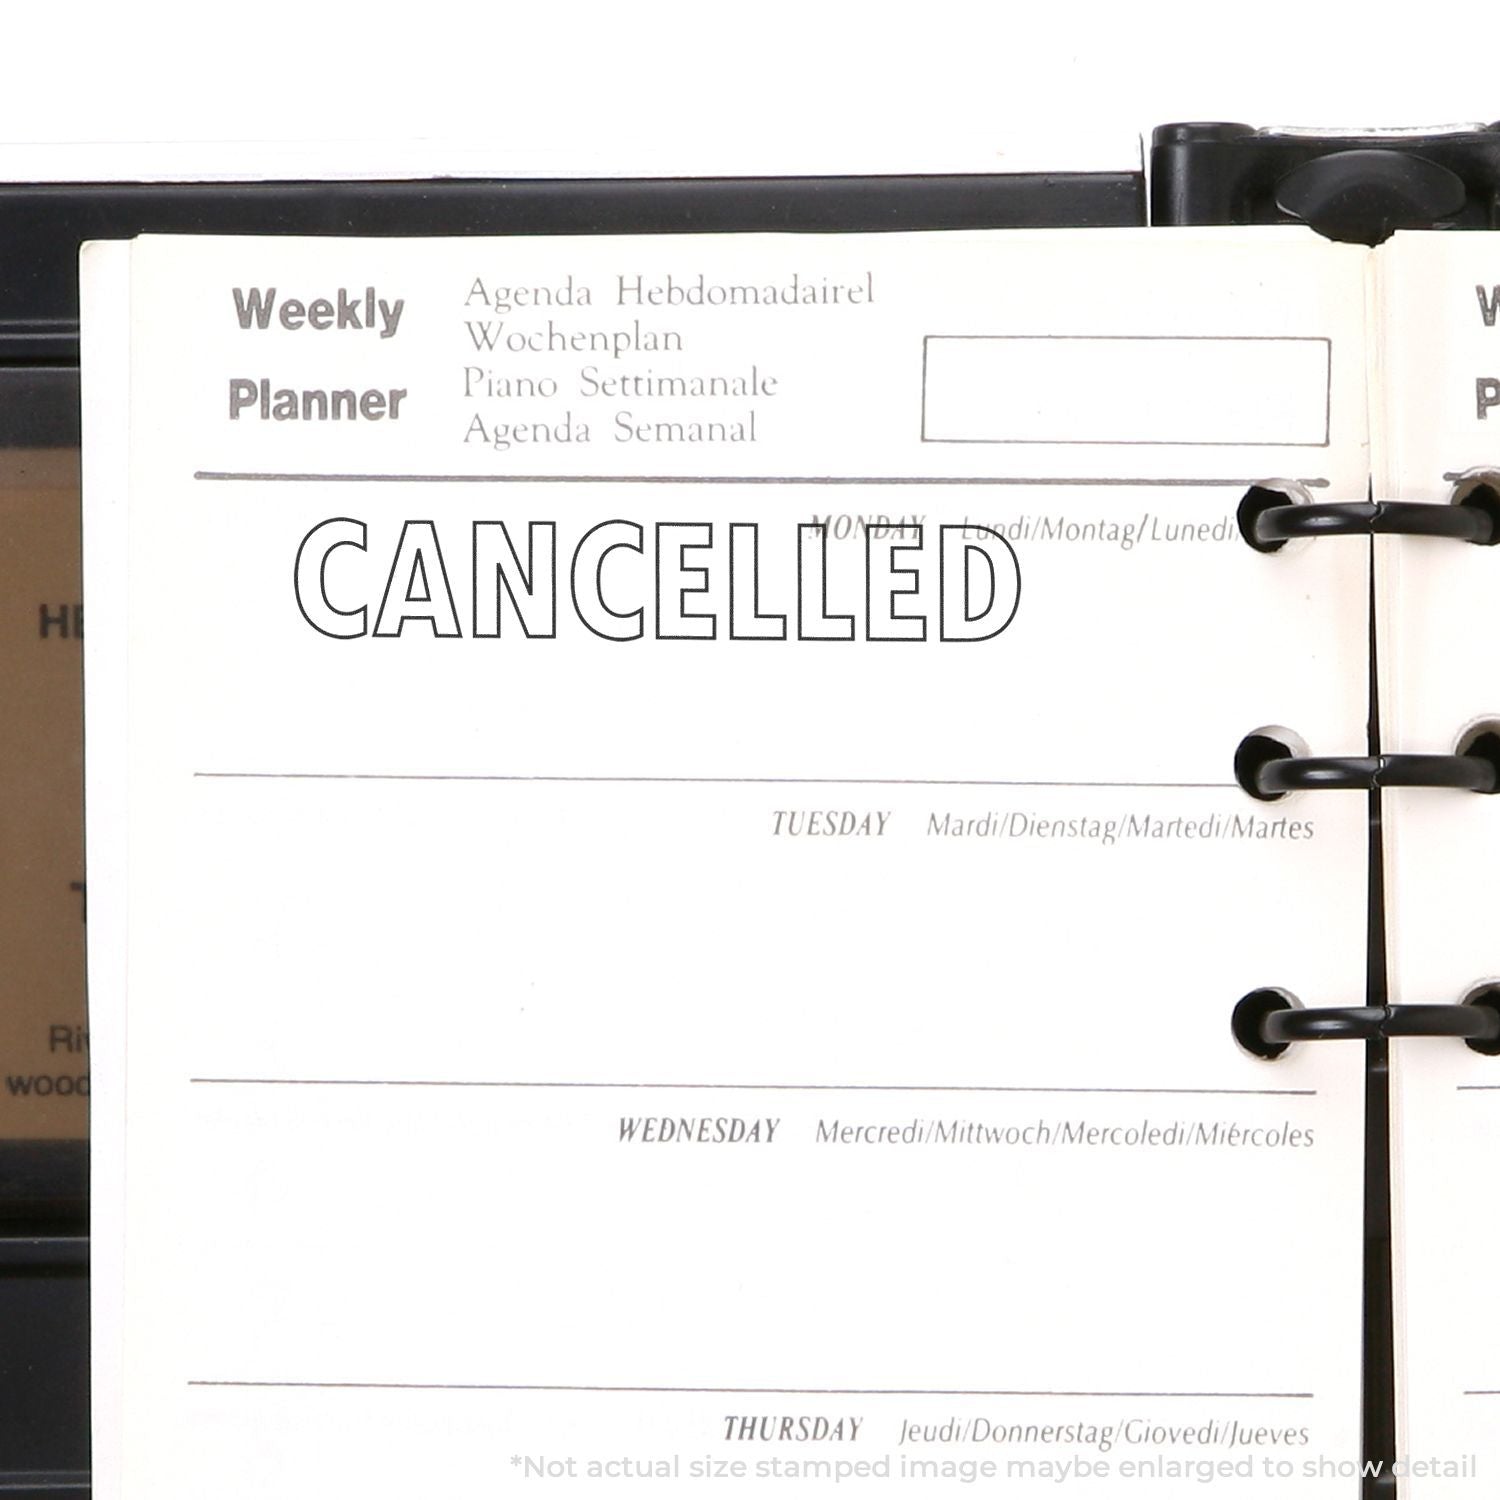 A self-inking stamp with a stamped image showing how the text "CANCELLED" in an outline style is displayed after stamping.